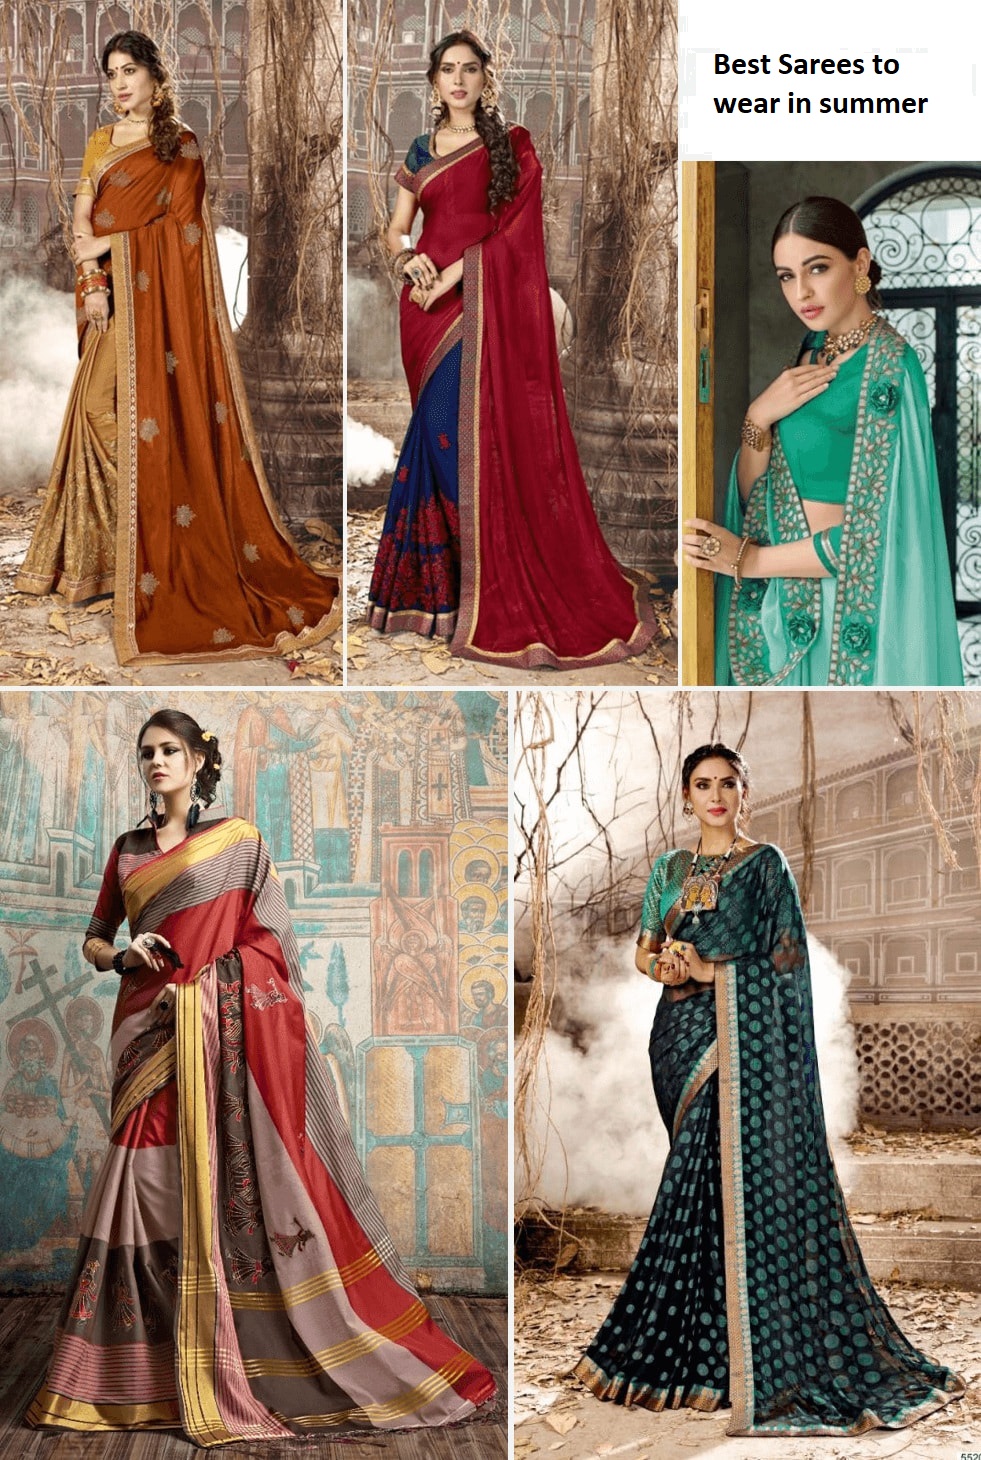 5 different types of sarees to wear in summer